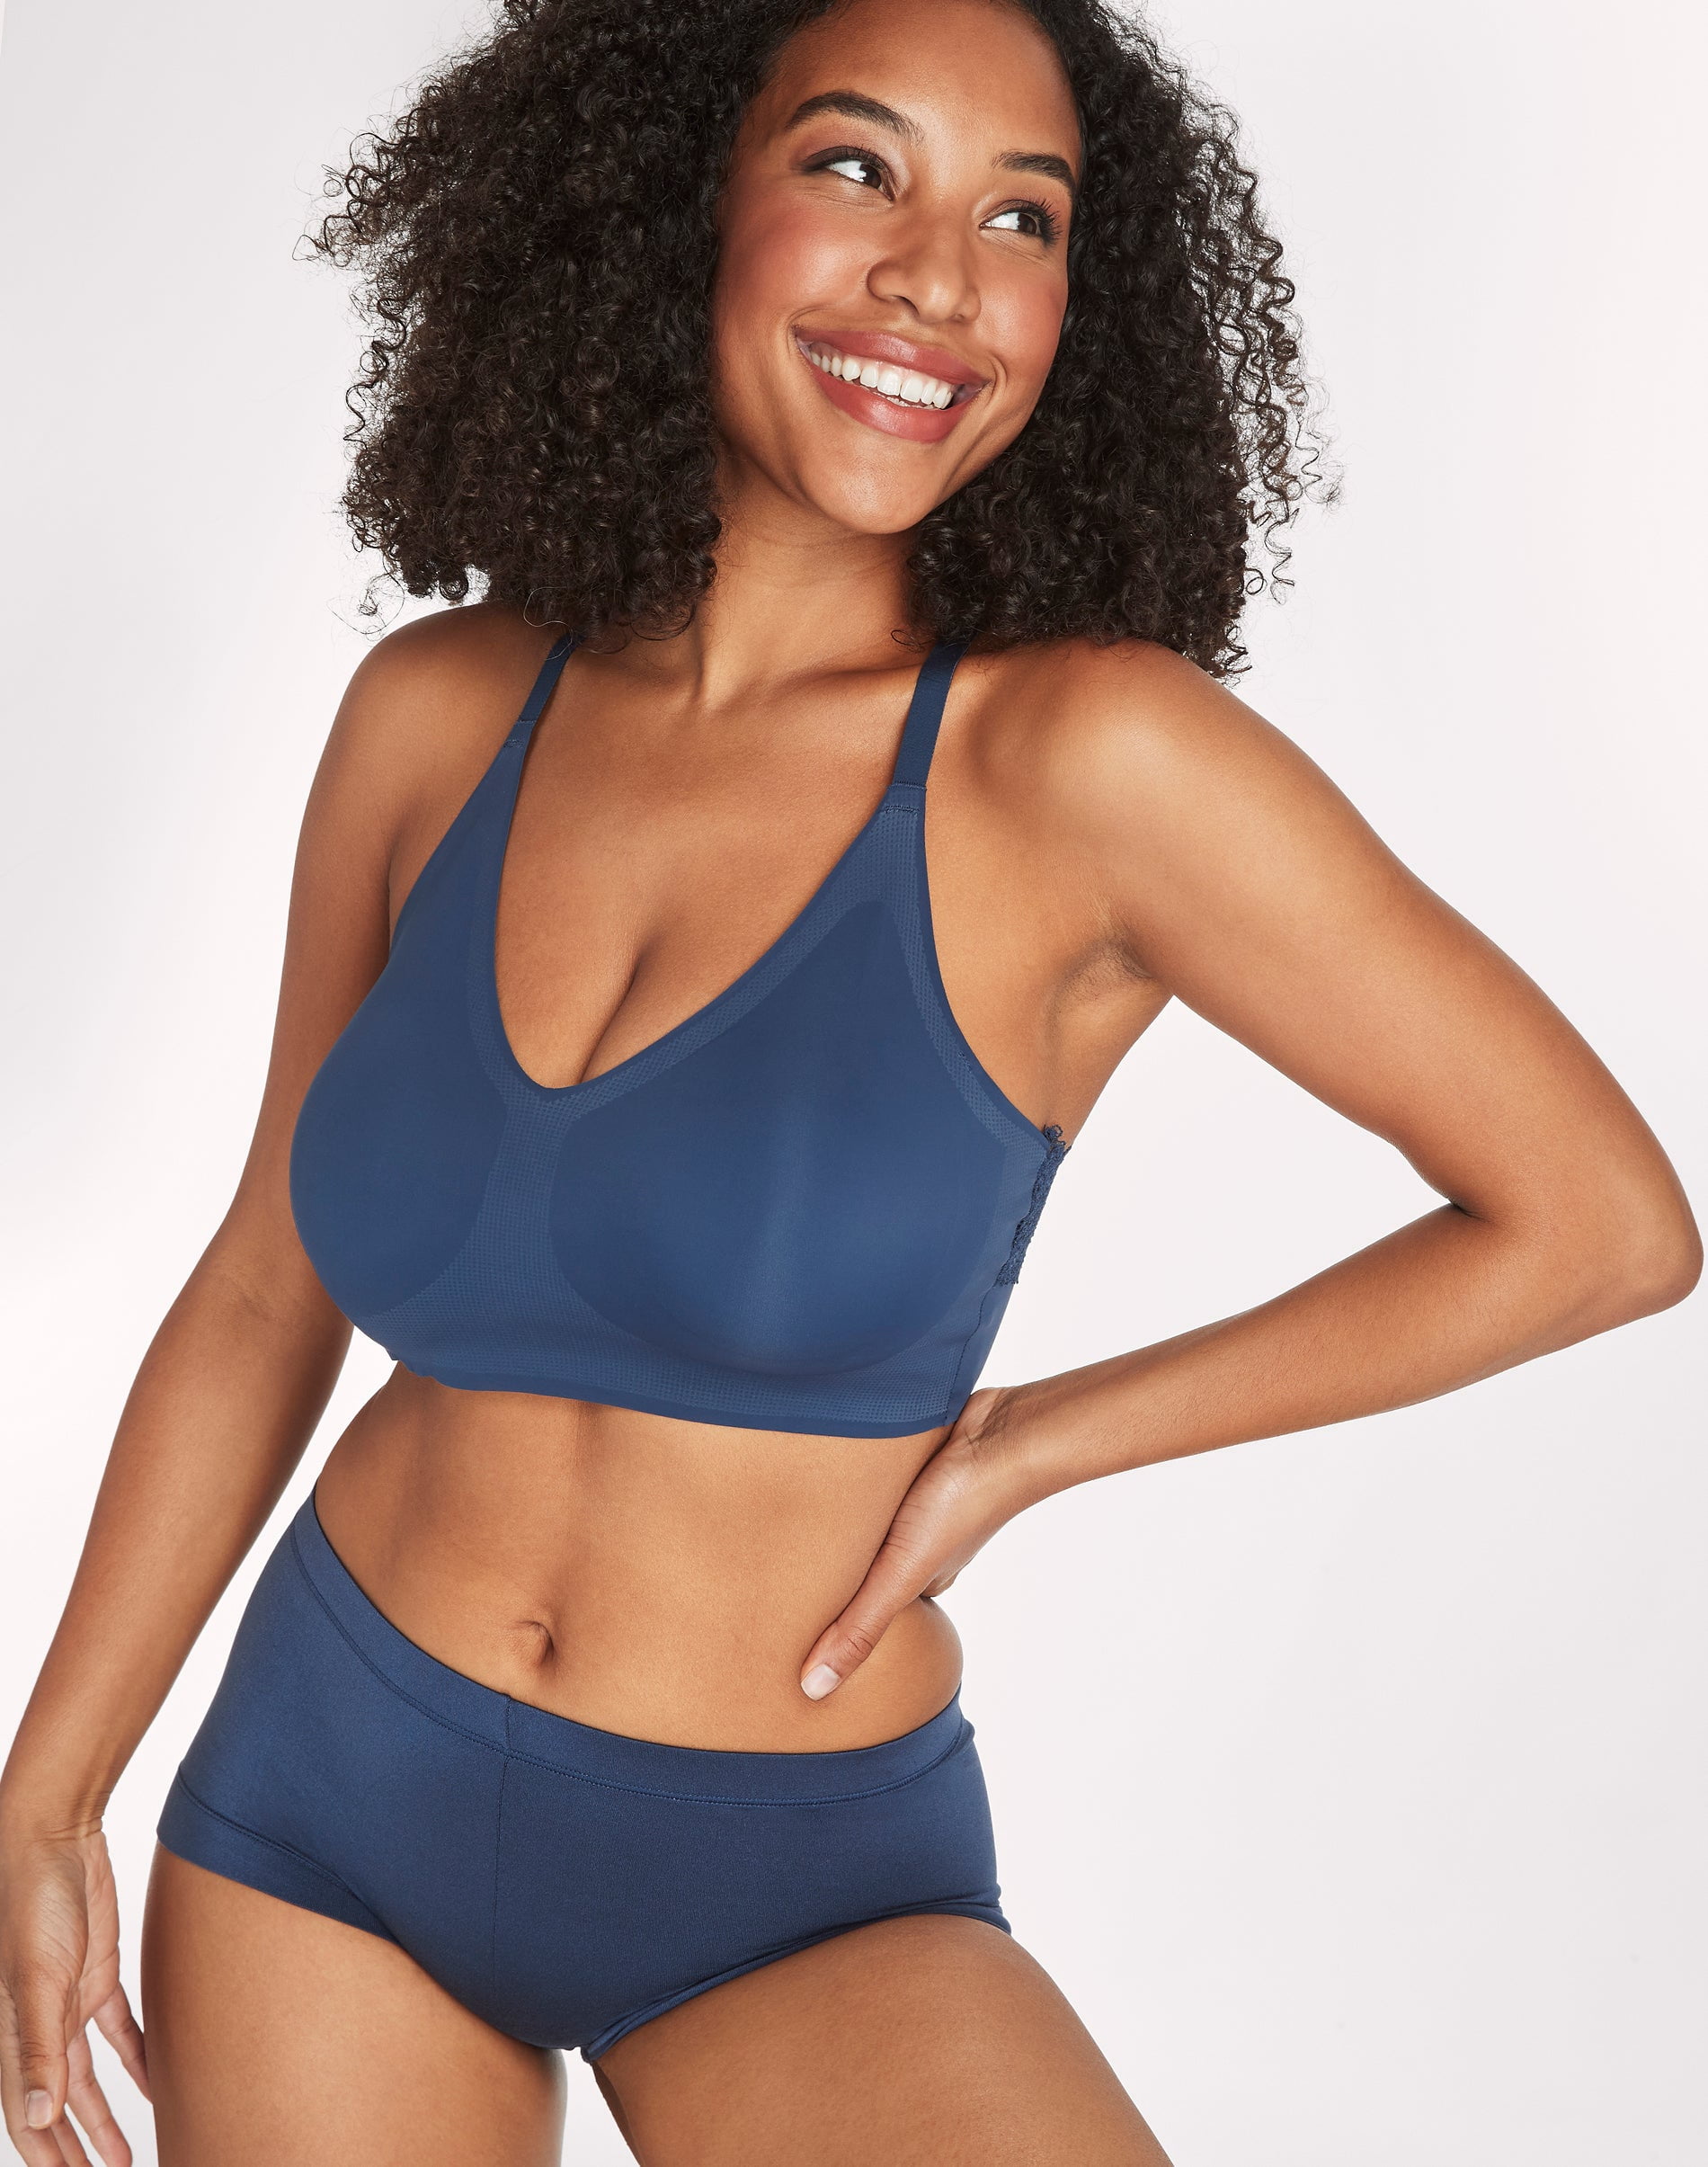 Maidenform: Two Bras for the Price of One + Everybody Ships FREE!